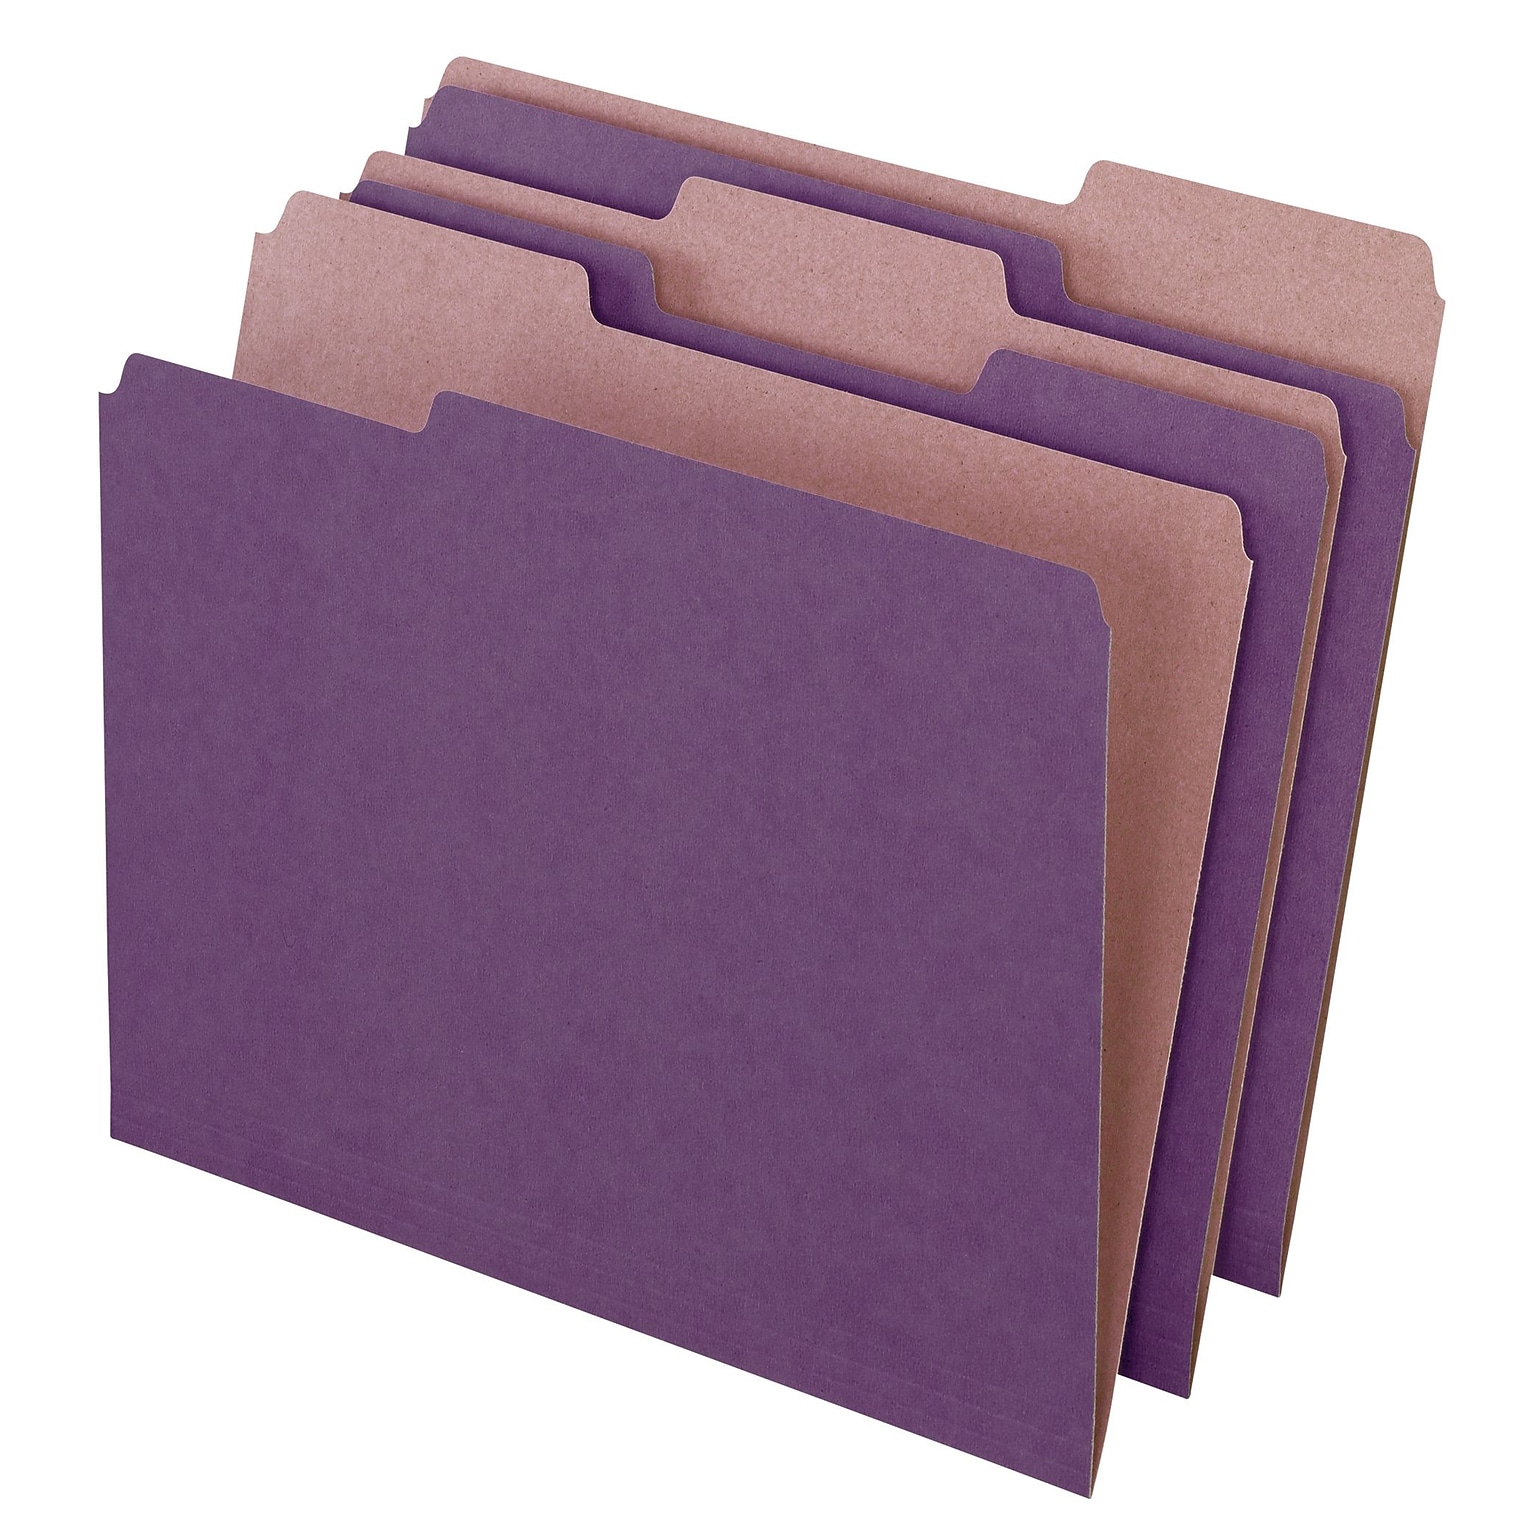 Pendaflex Earthwise Recycled Color File Folders, 3 Tab Positions, Letter, Violet, 100/Box (4335)